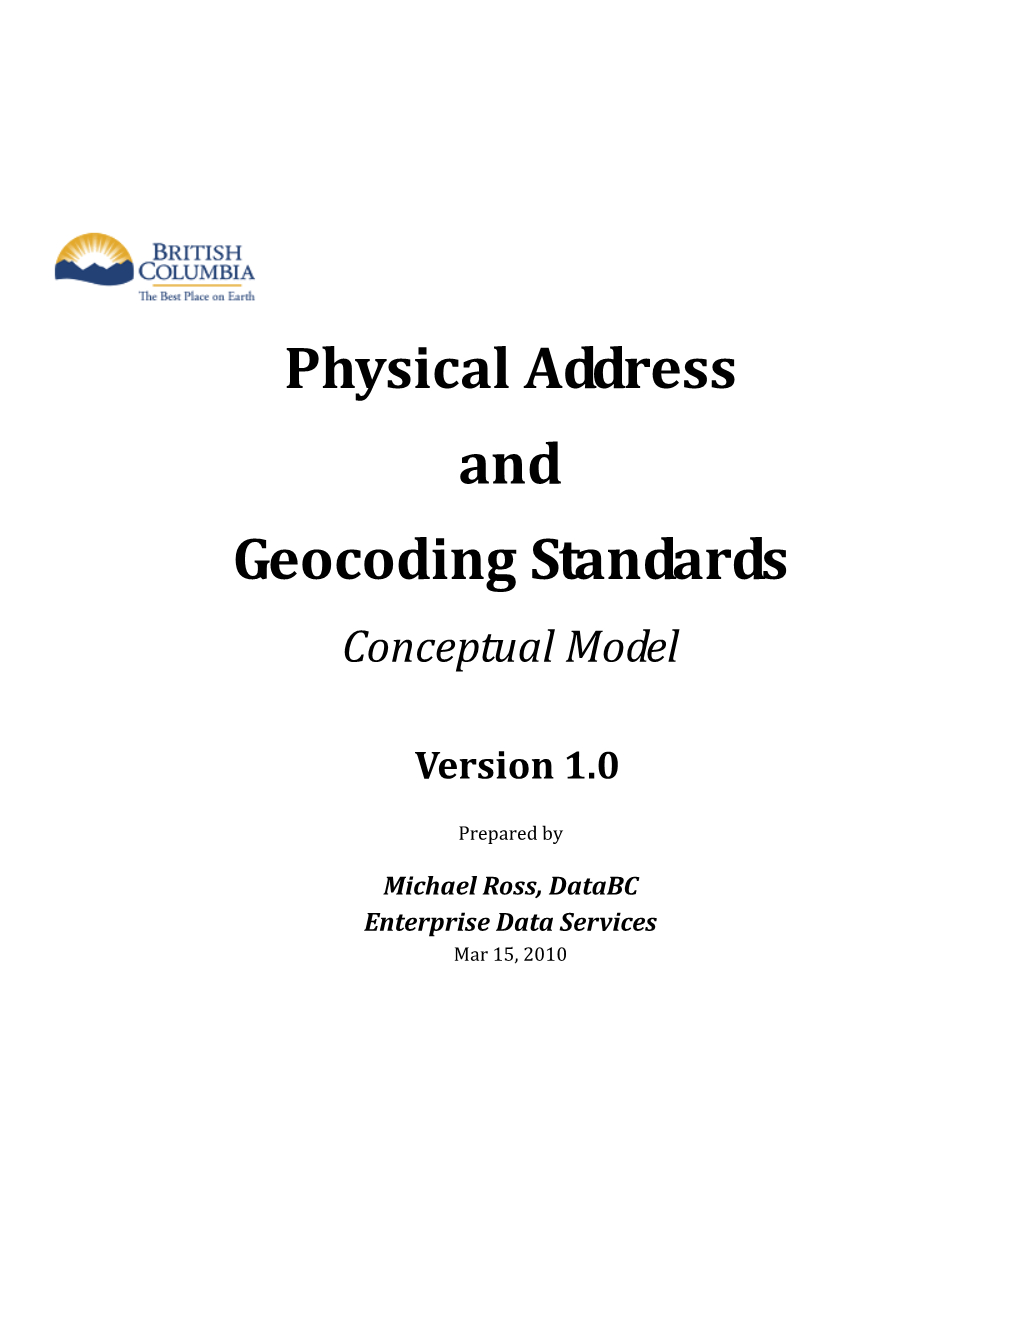 Physical Address and Geocoding Standards Conceptual Model